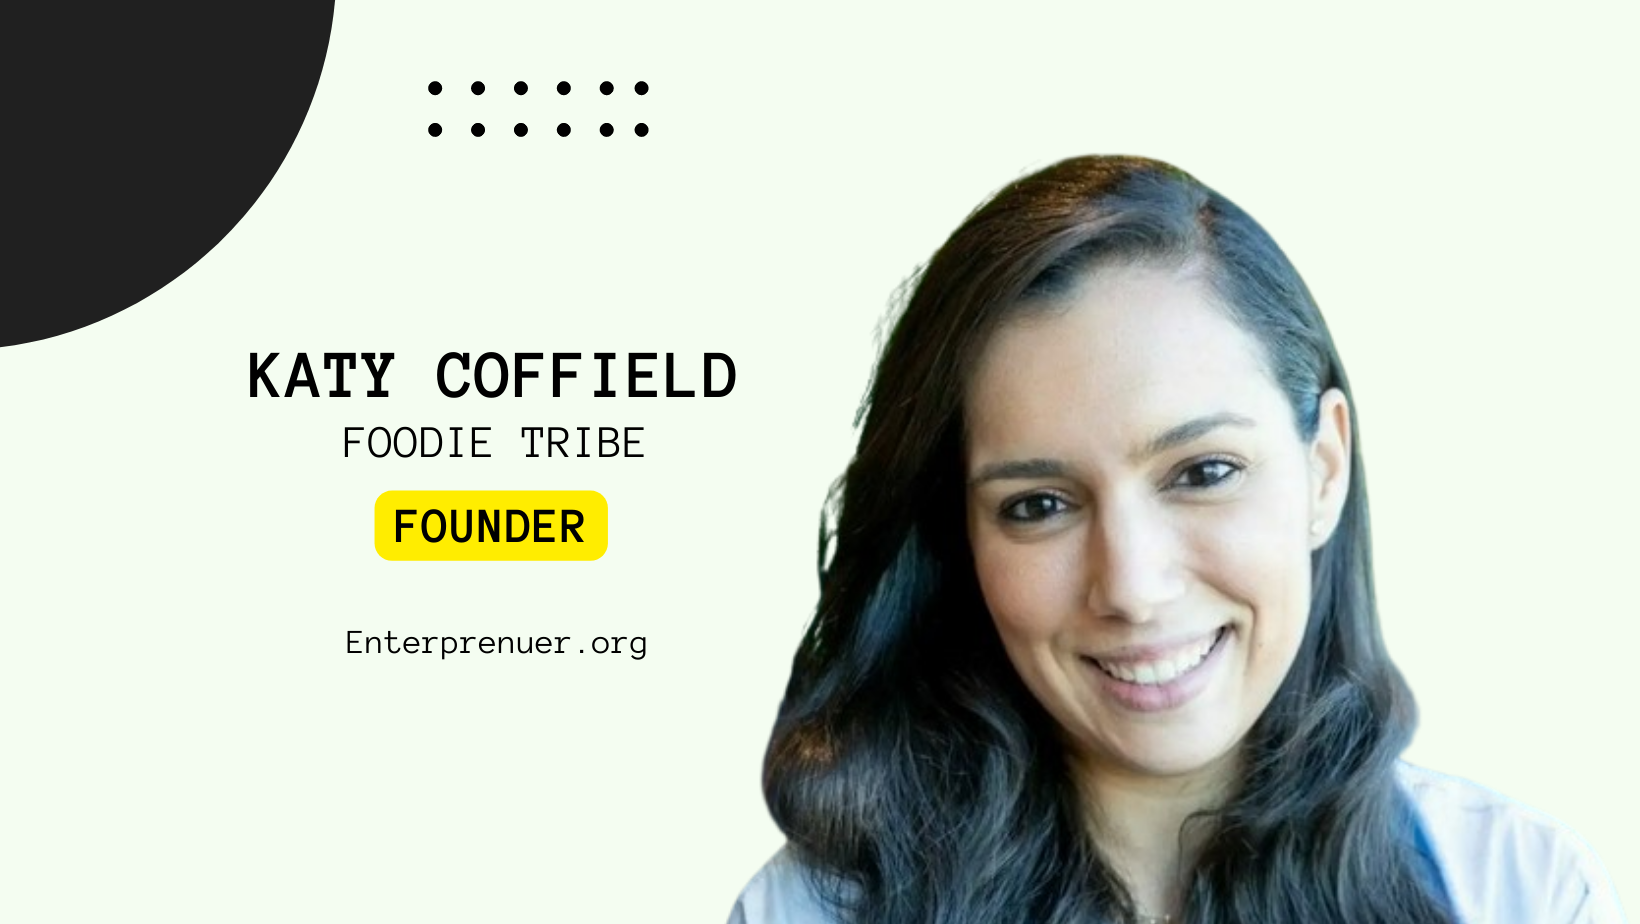 Katy Coffield Co-Founder of Foodie Tribe